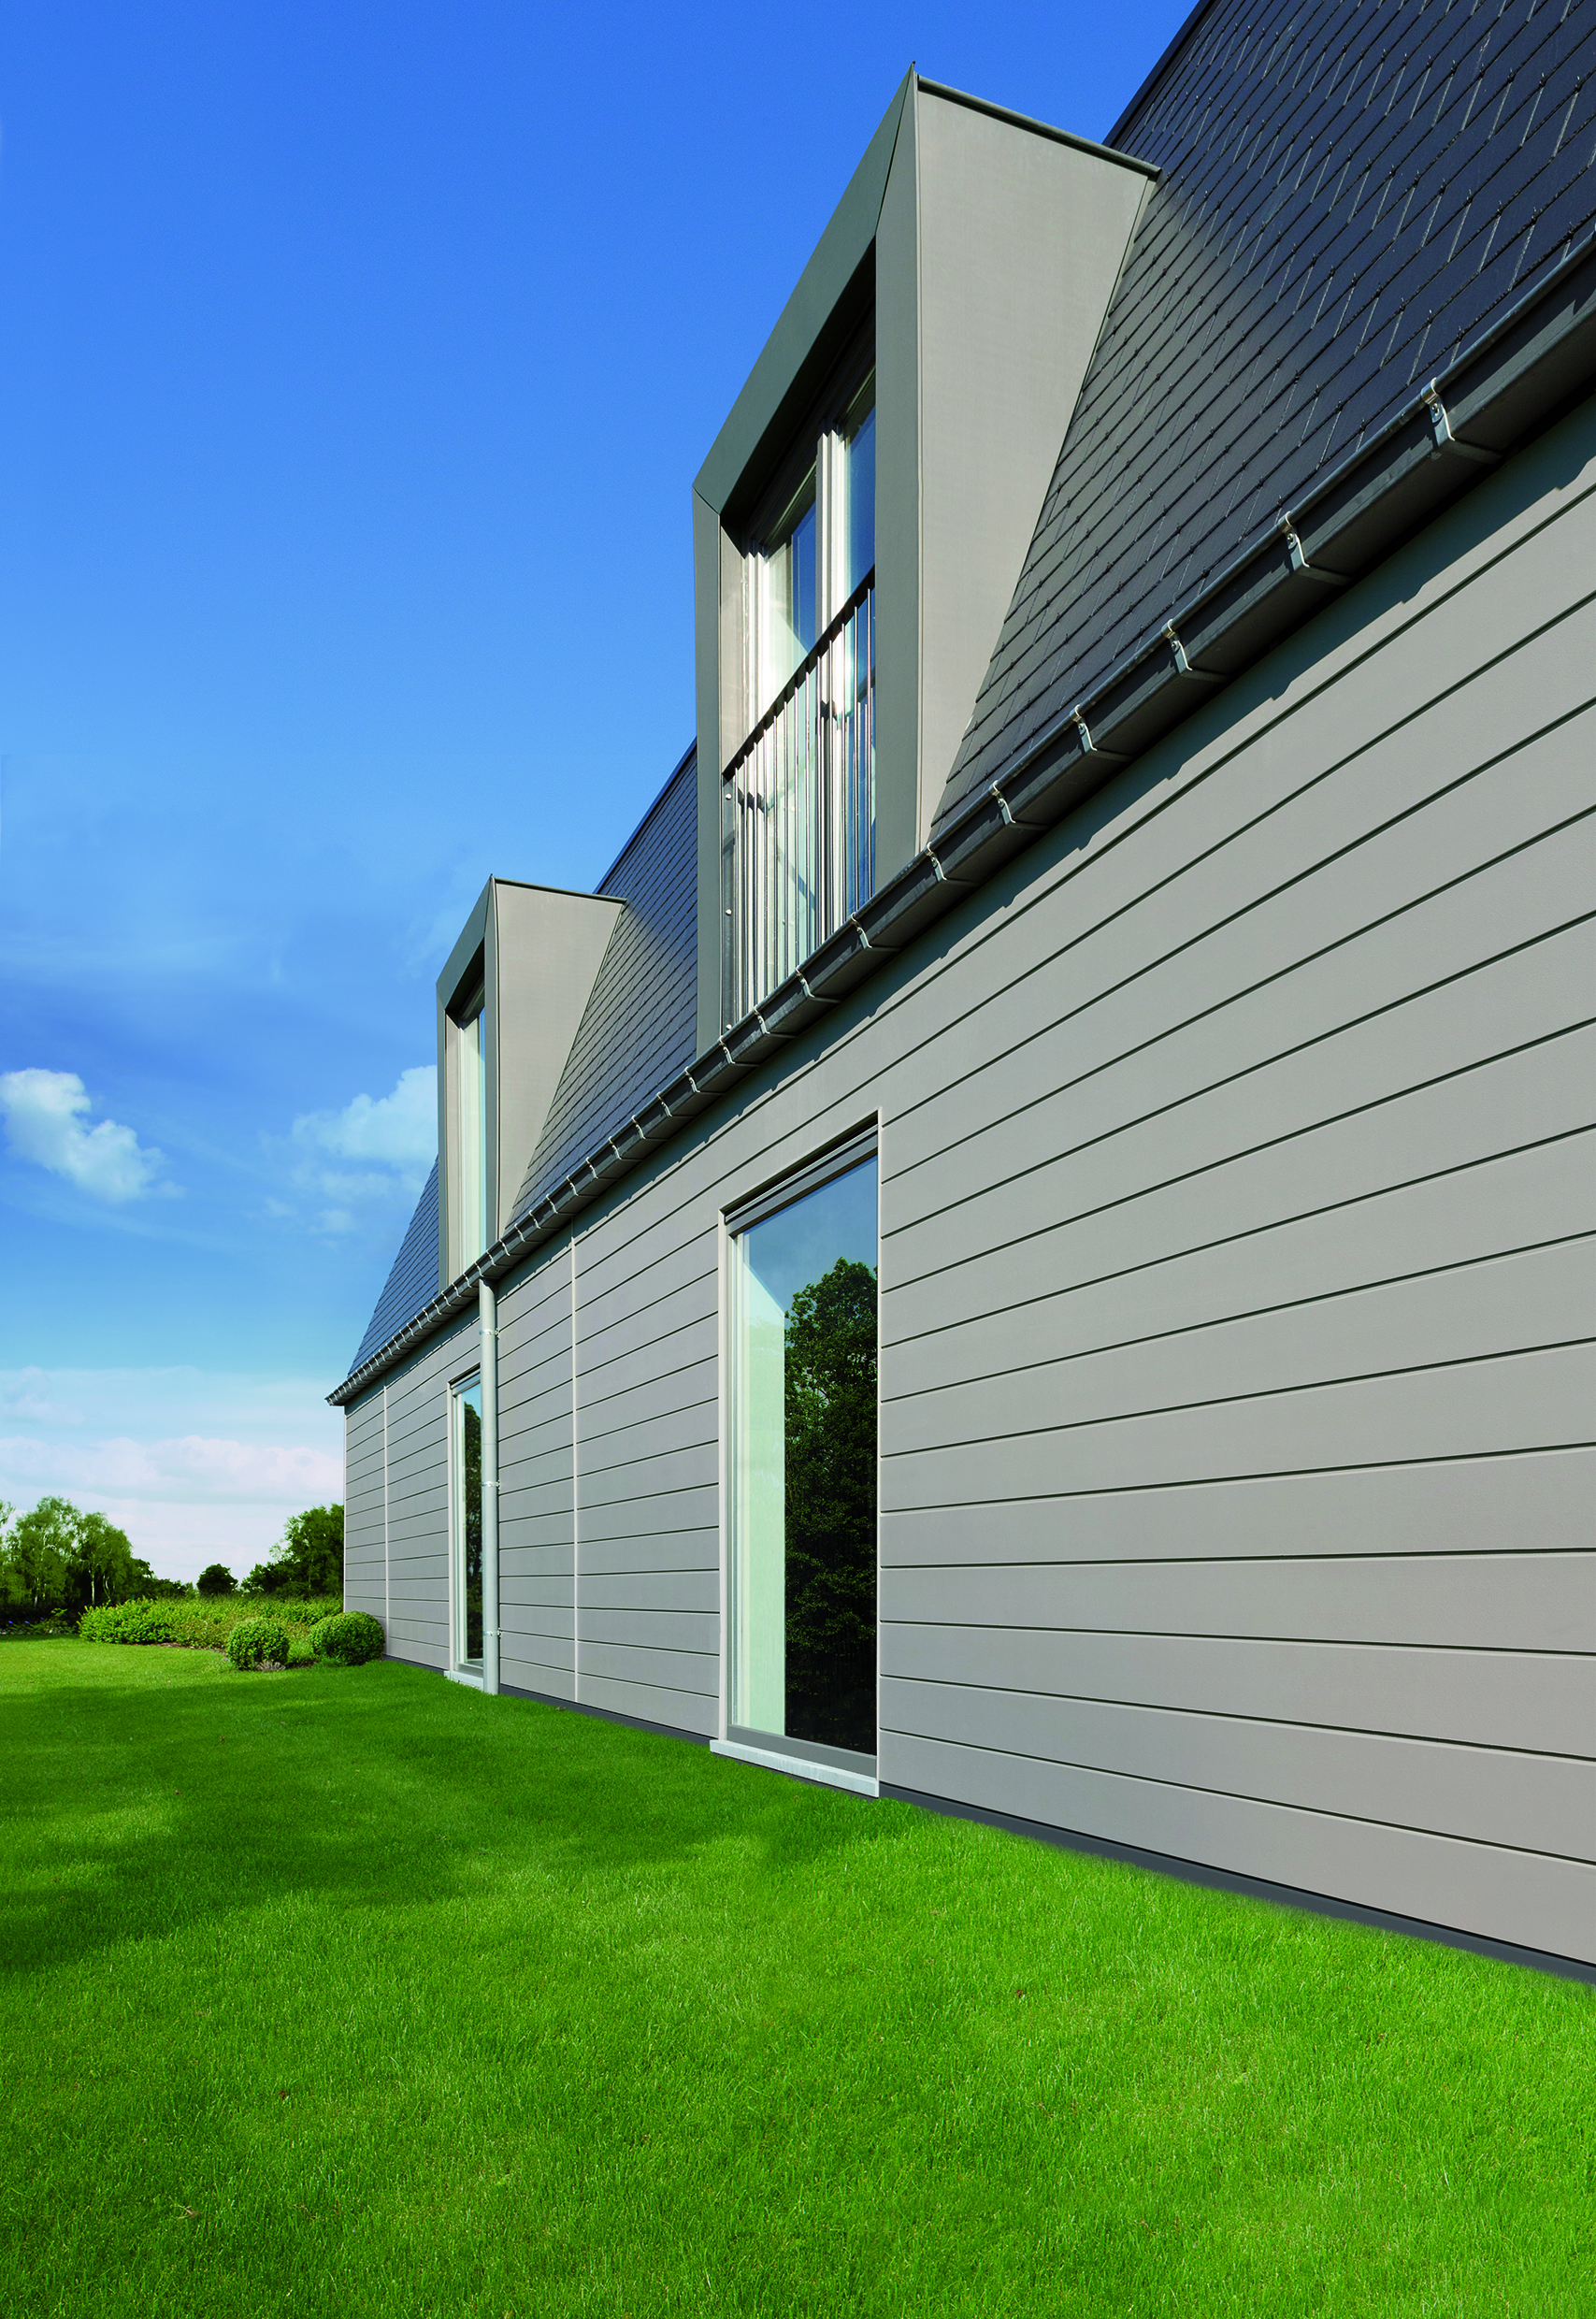 Cedral cladding affordable and beautiful